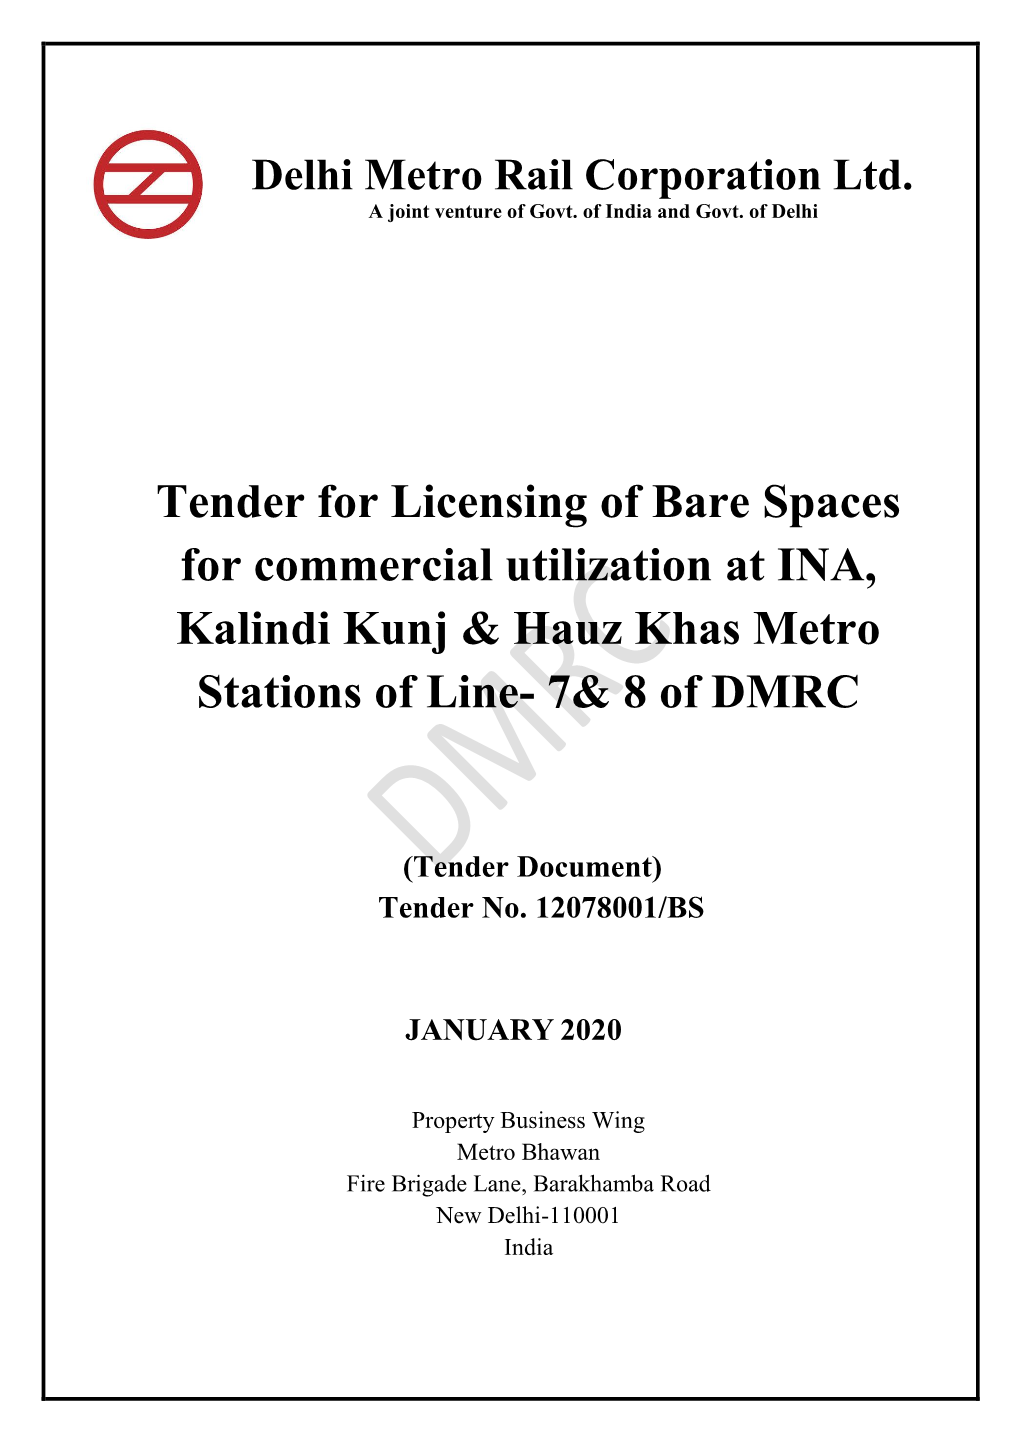 Tender for Licensing of Bare Spaces for Commercial Utilization at INA, Kalindi Kunj & Hauz Khas Metro Stations of Line- 7&Am